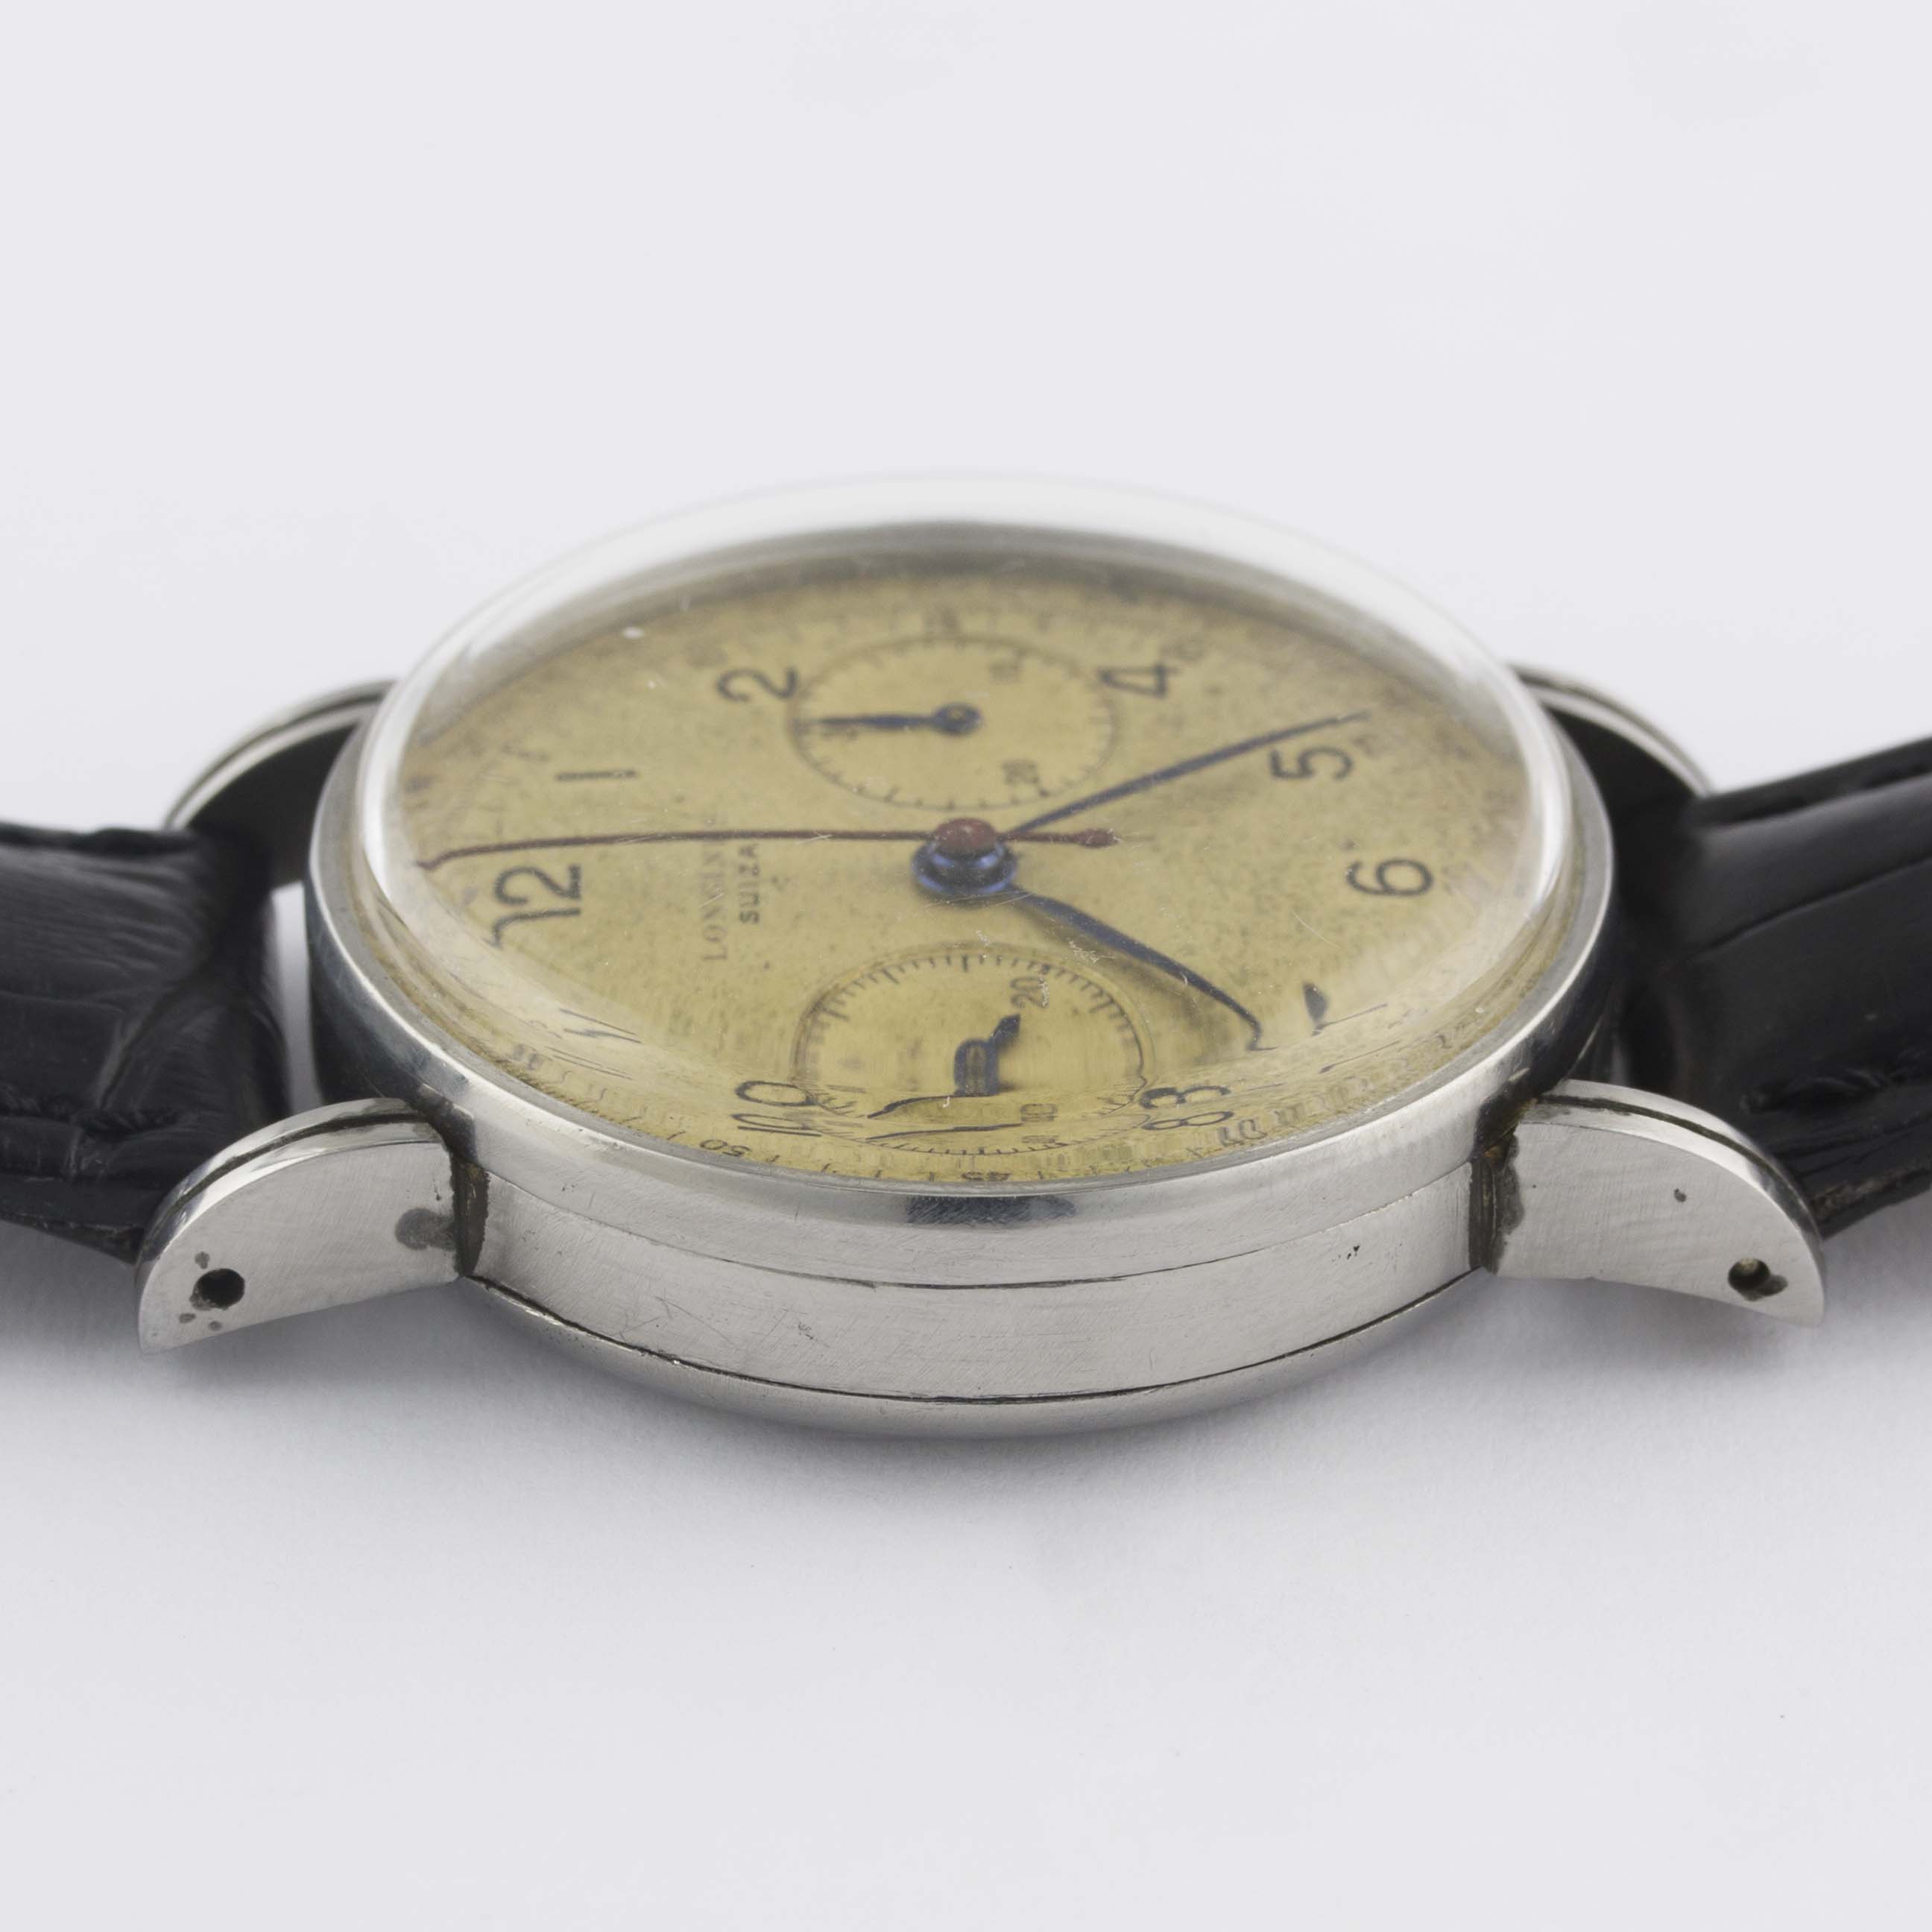 A GENTLEMAN'S STAINLESS STEEL LONGINES FLYBACK CHRONOGRAPH WRIST WATCH CIRCA 1946, REF. 3226 - Image 10 of 10